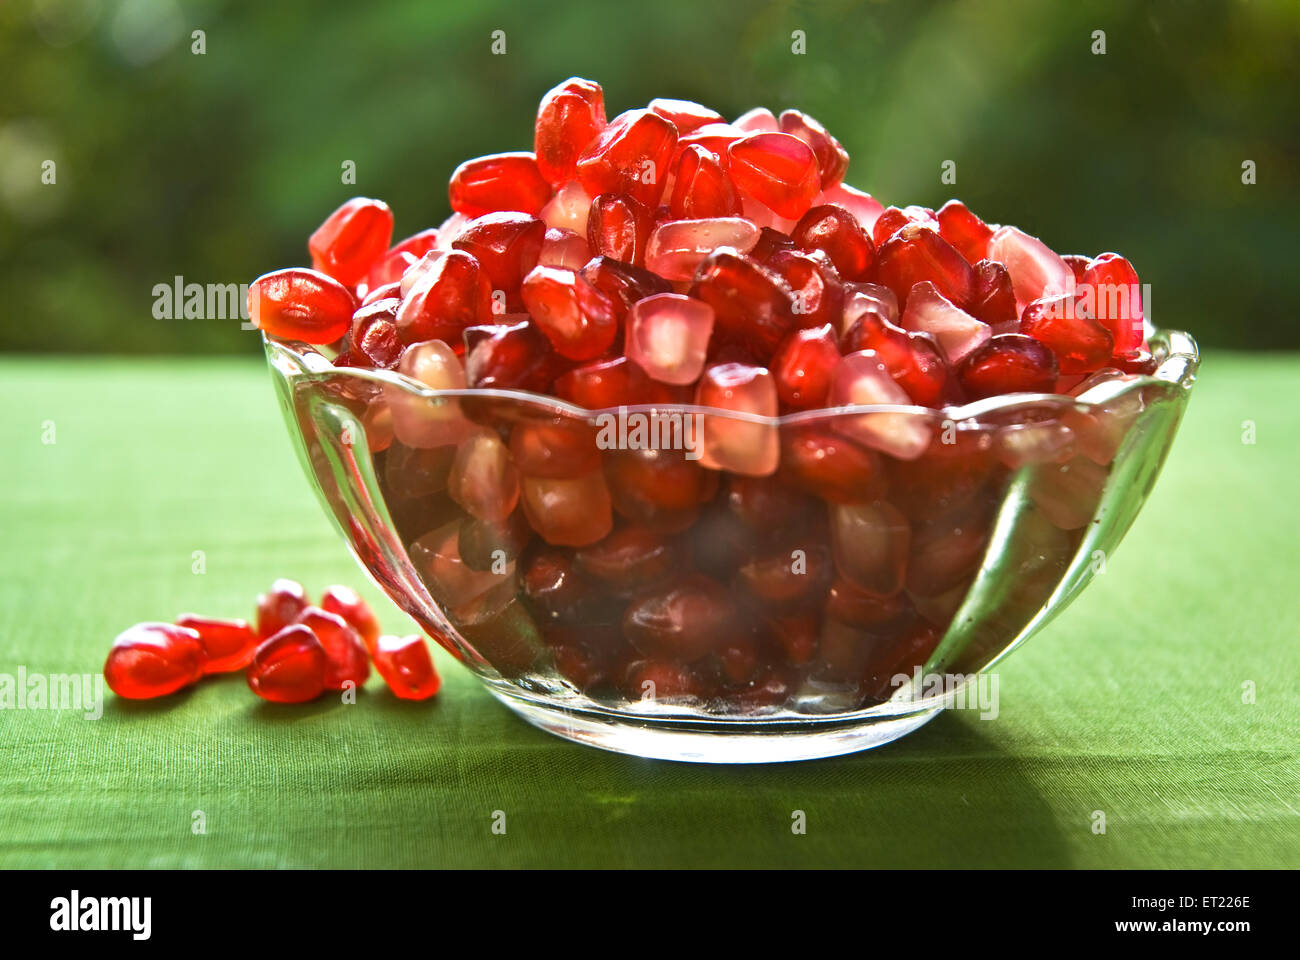 Pomegranate seeds in glass bowl on green cloth Stock Photo